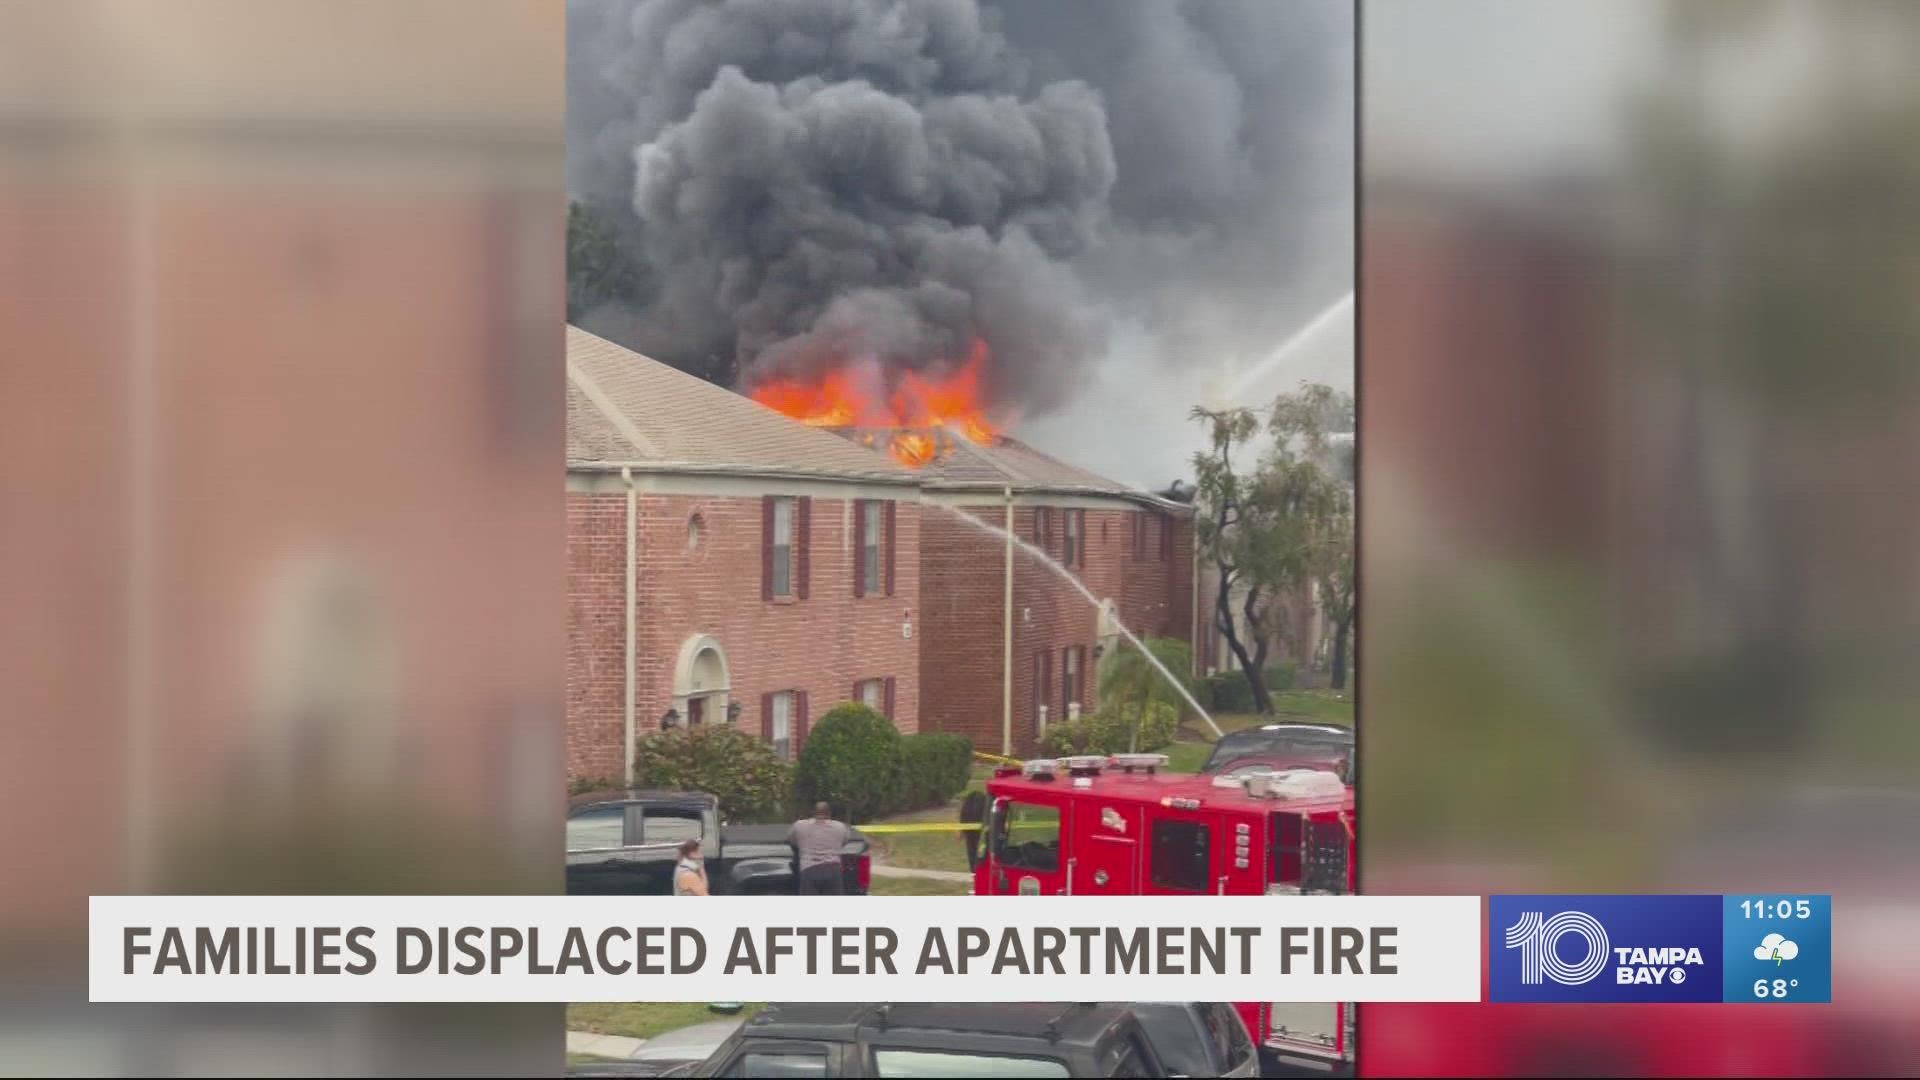 Out of the 16 units in the building, the fire chief said most of the top-floor units will be a total loss while bottom-floor units will have water damage.